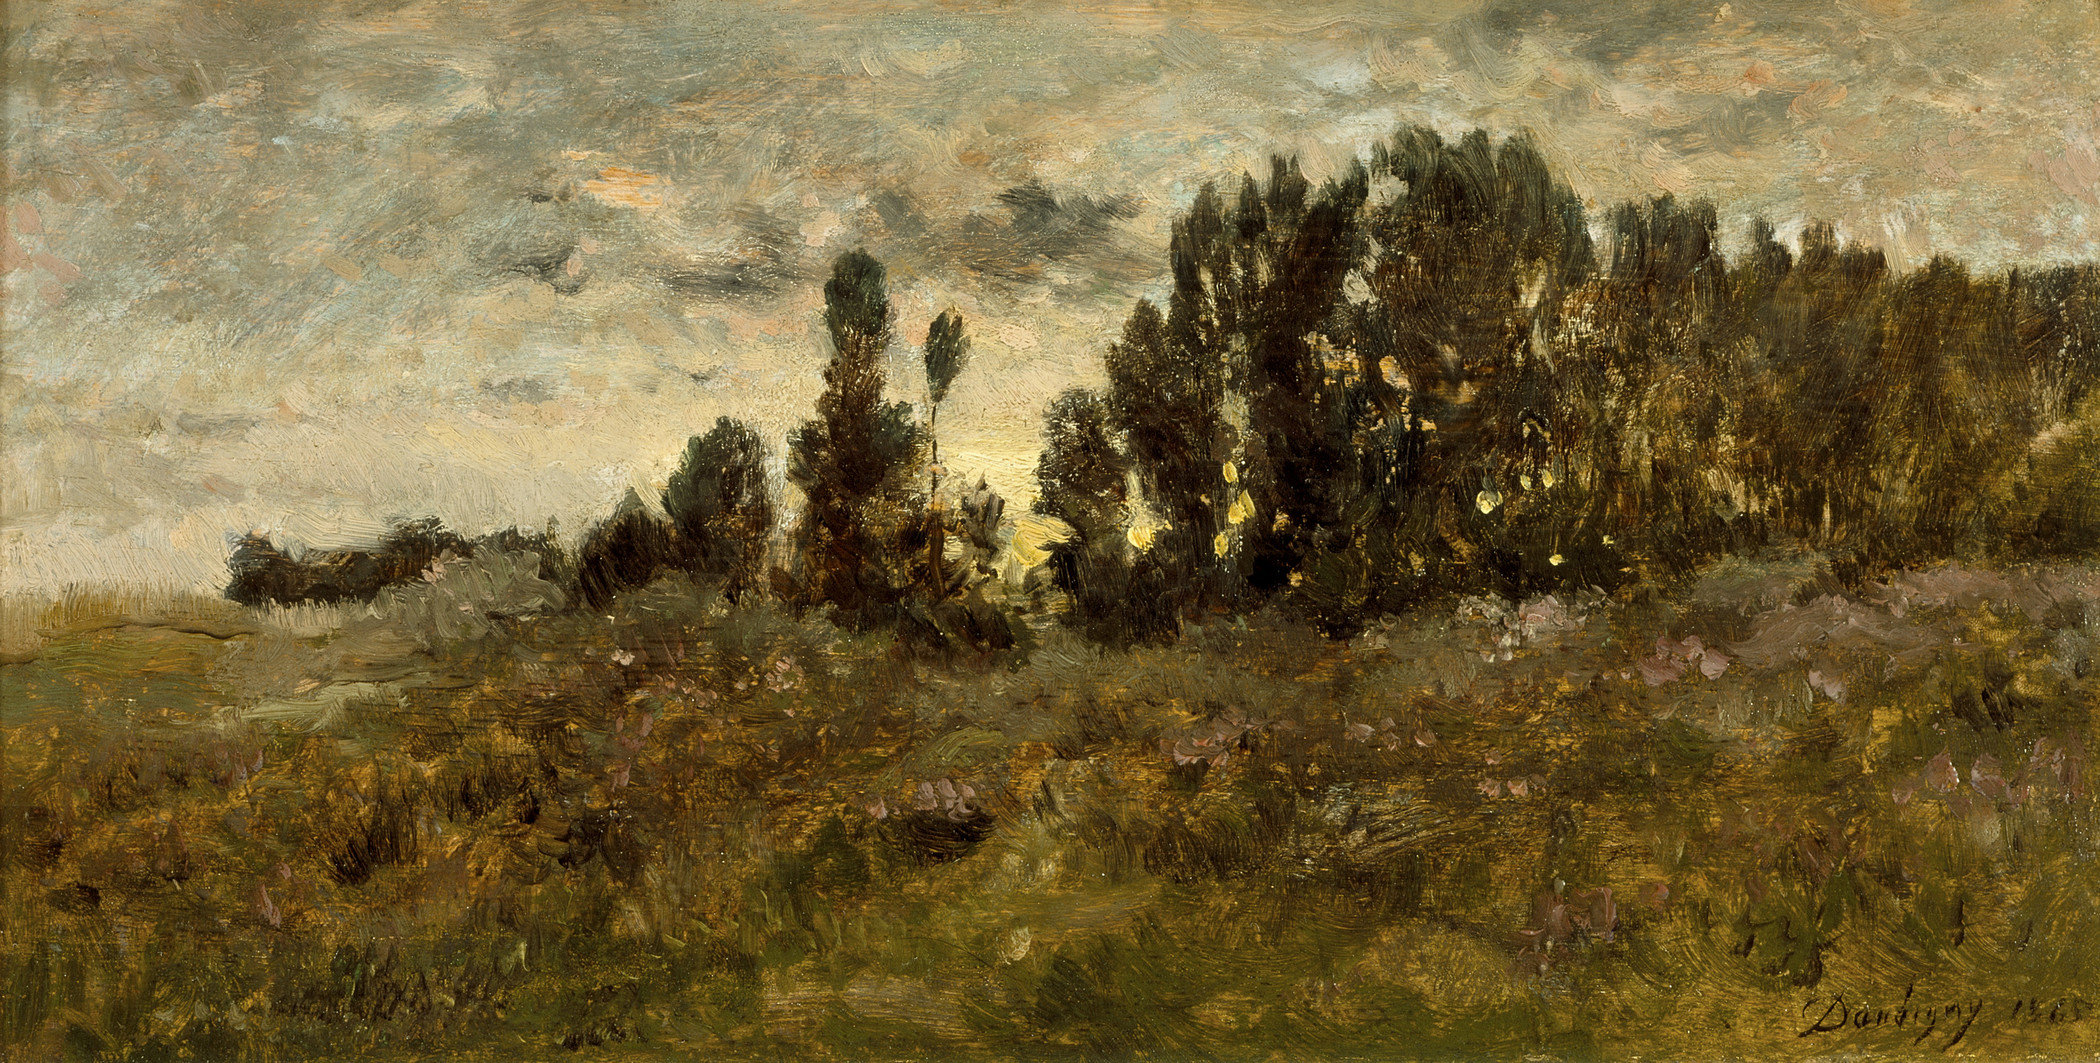 Grassy landscape with trees. 